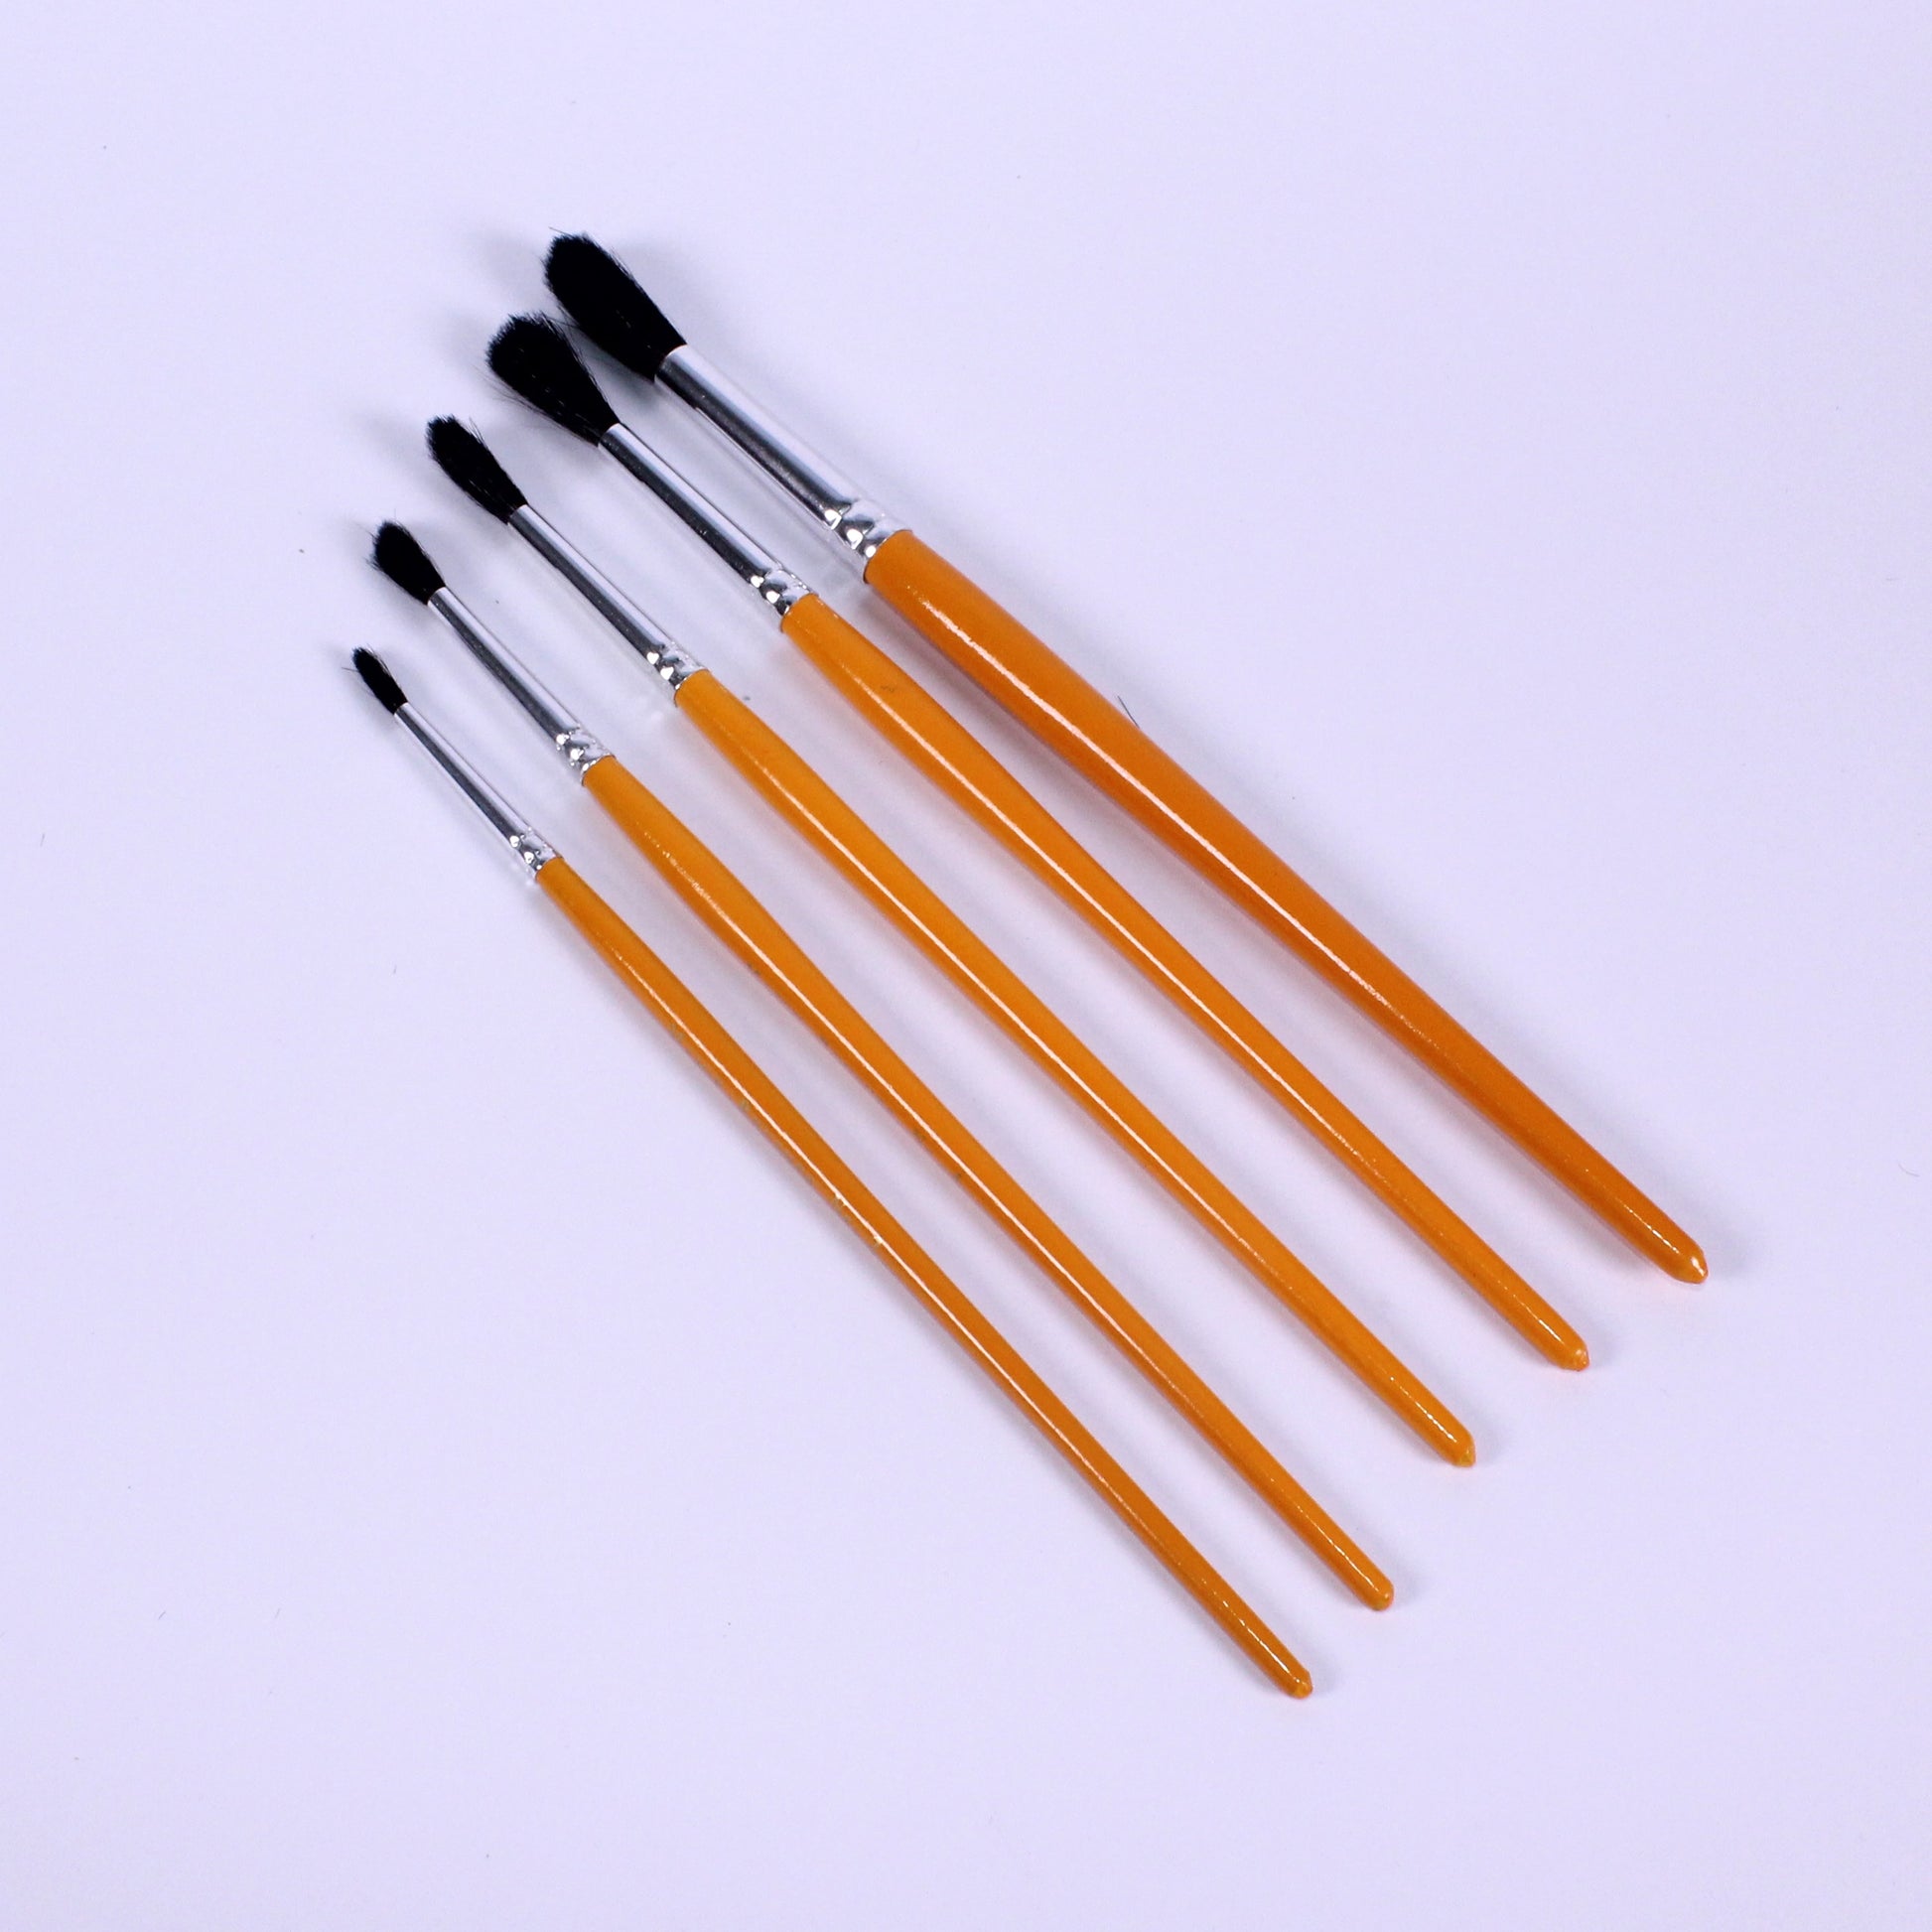 watercolour brushes